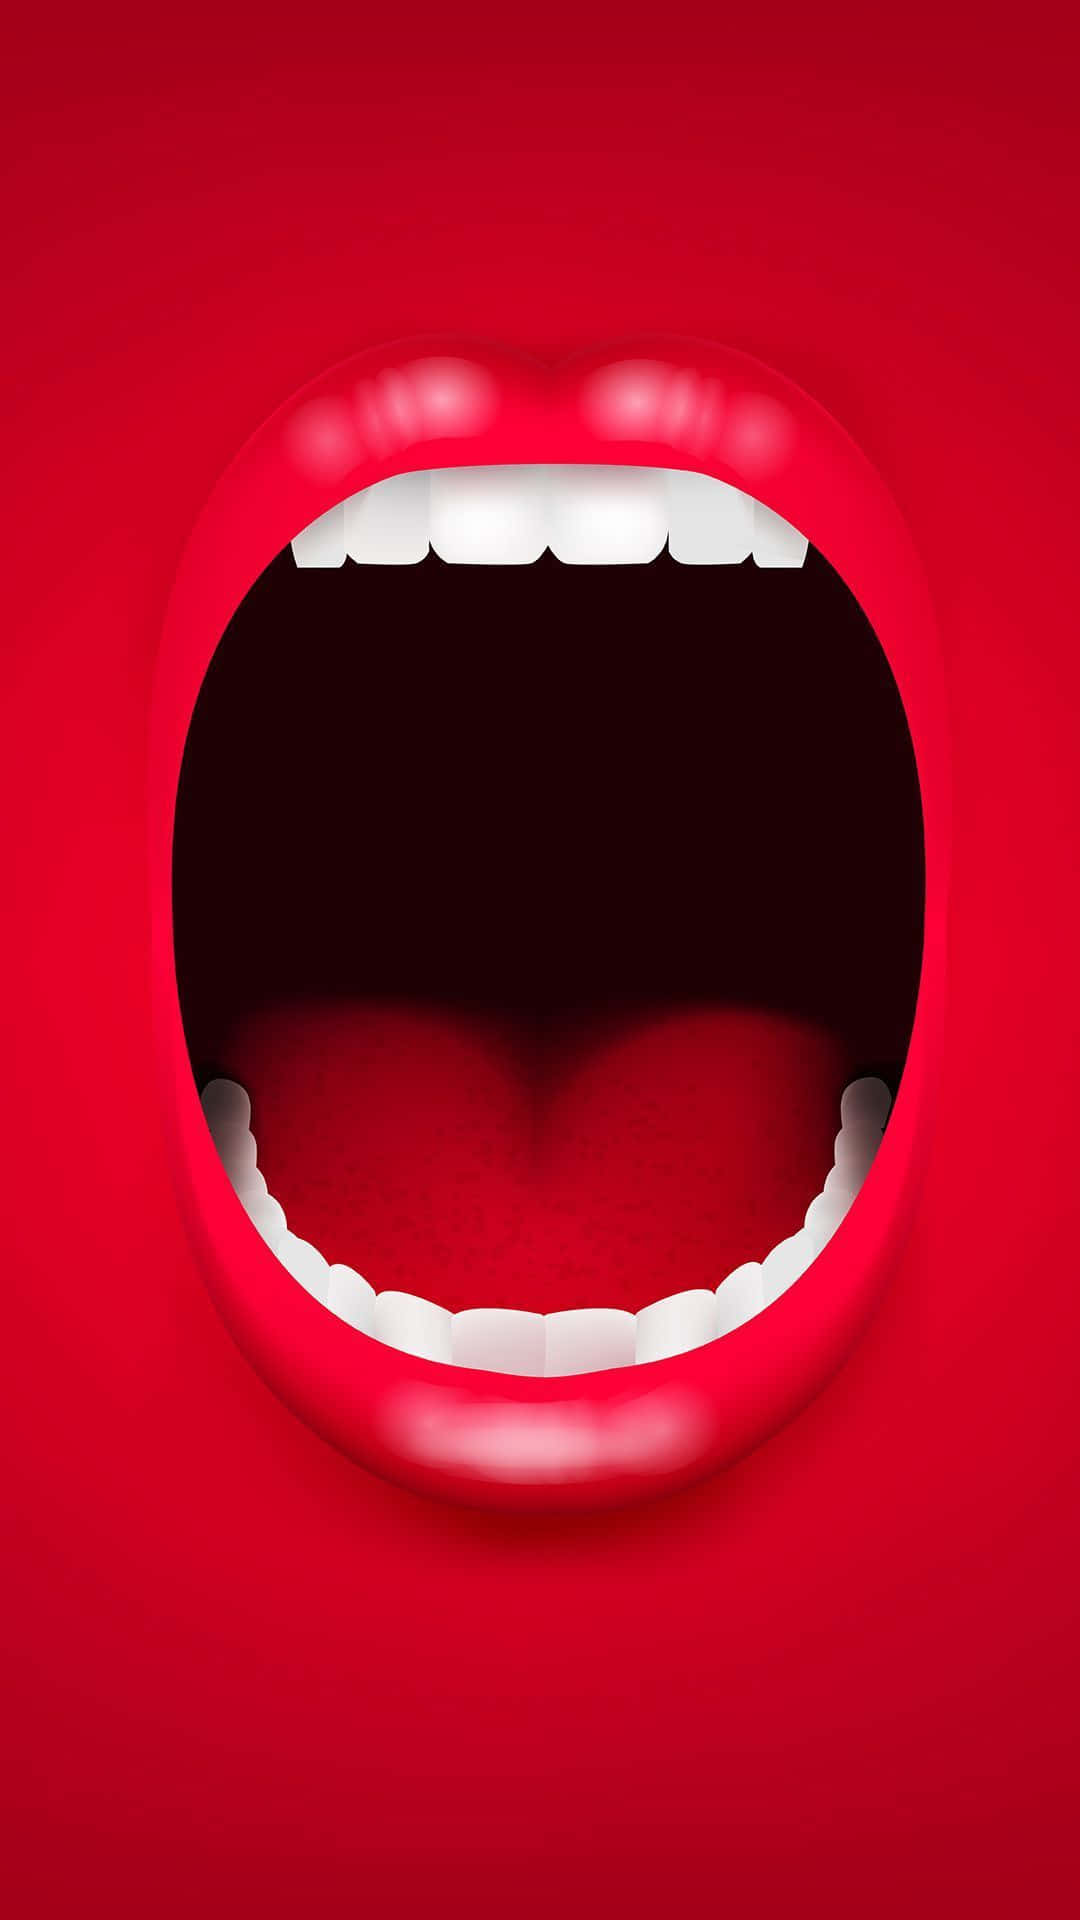 Oral Health Of Mouth Art Wallpaper